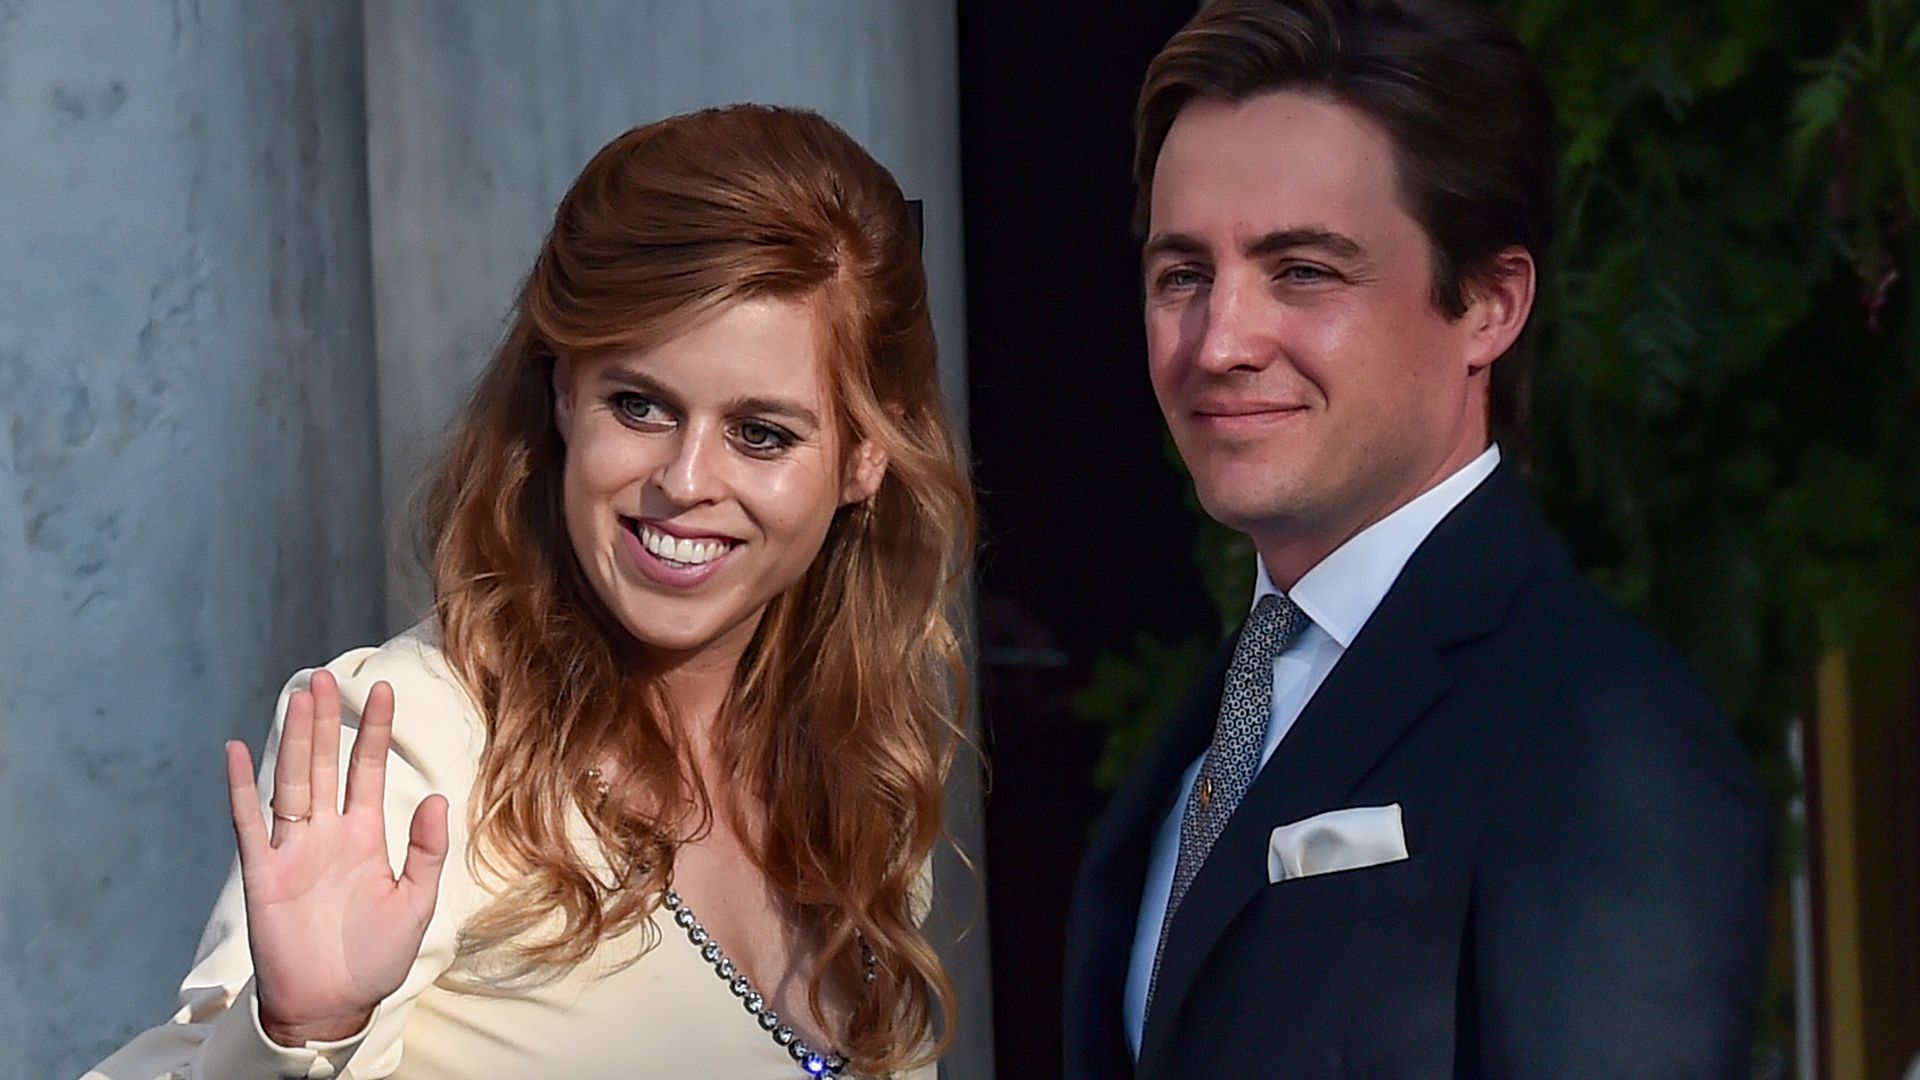 Why there are only 6 photos of Princess Beatrice's wedding in the public domain